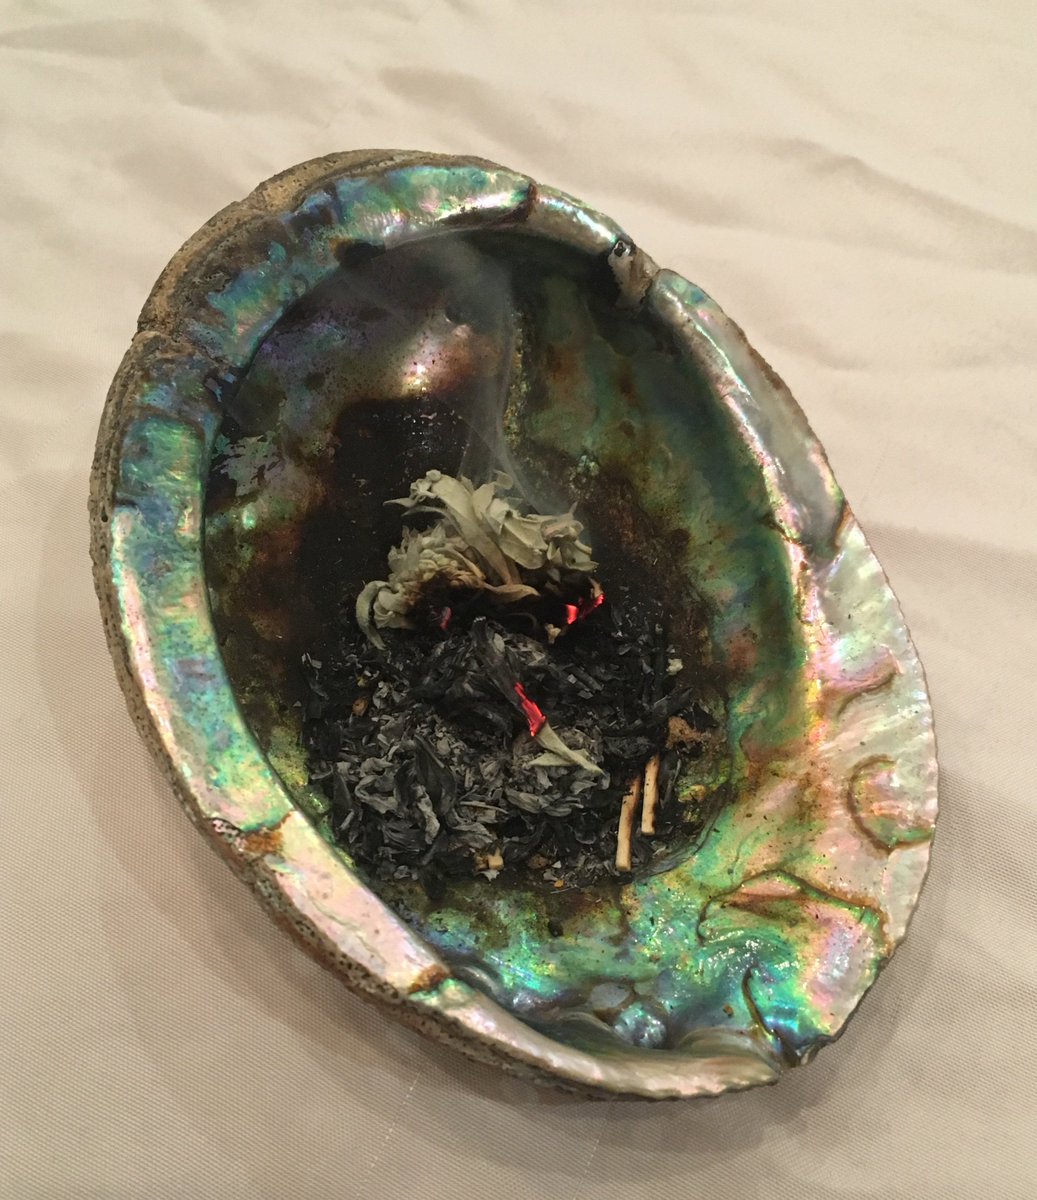 #Smudging involves the burning of sacred herbs for spiritual cleansing or blessing. Look for the burning sage circulating around #HOV2019 today!